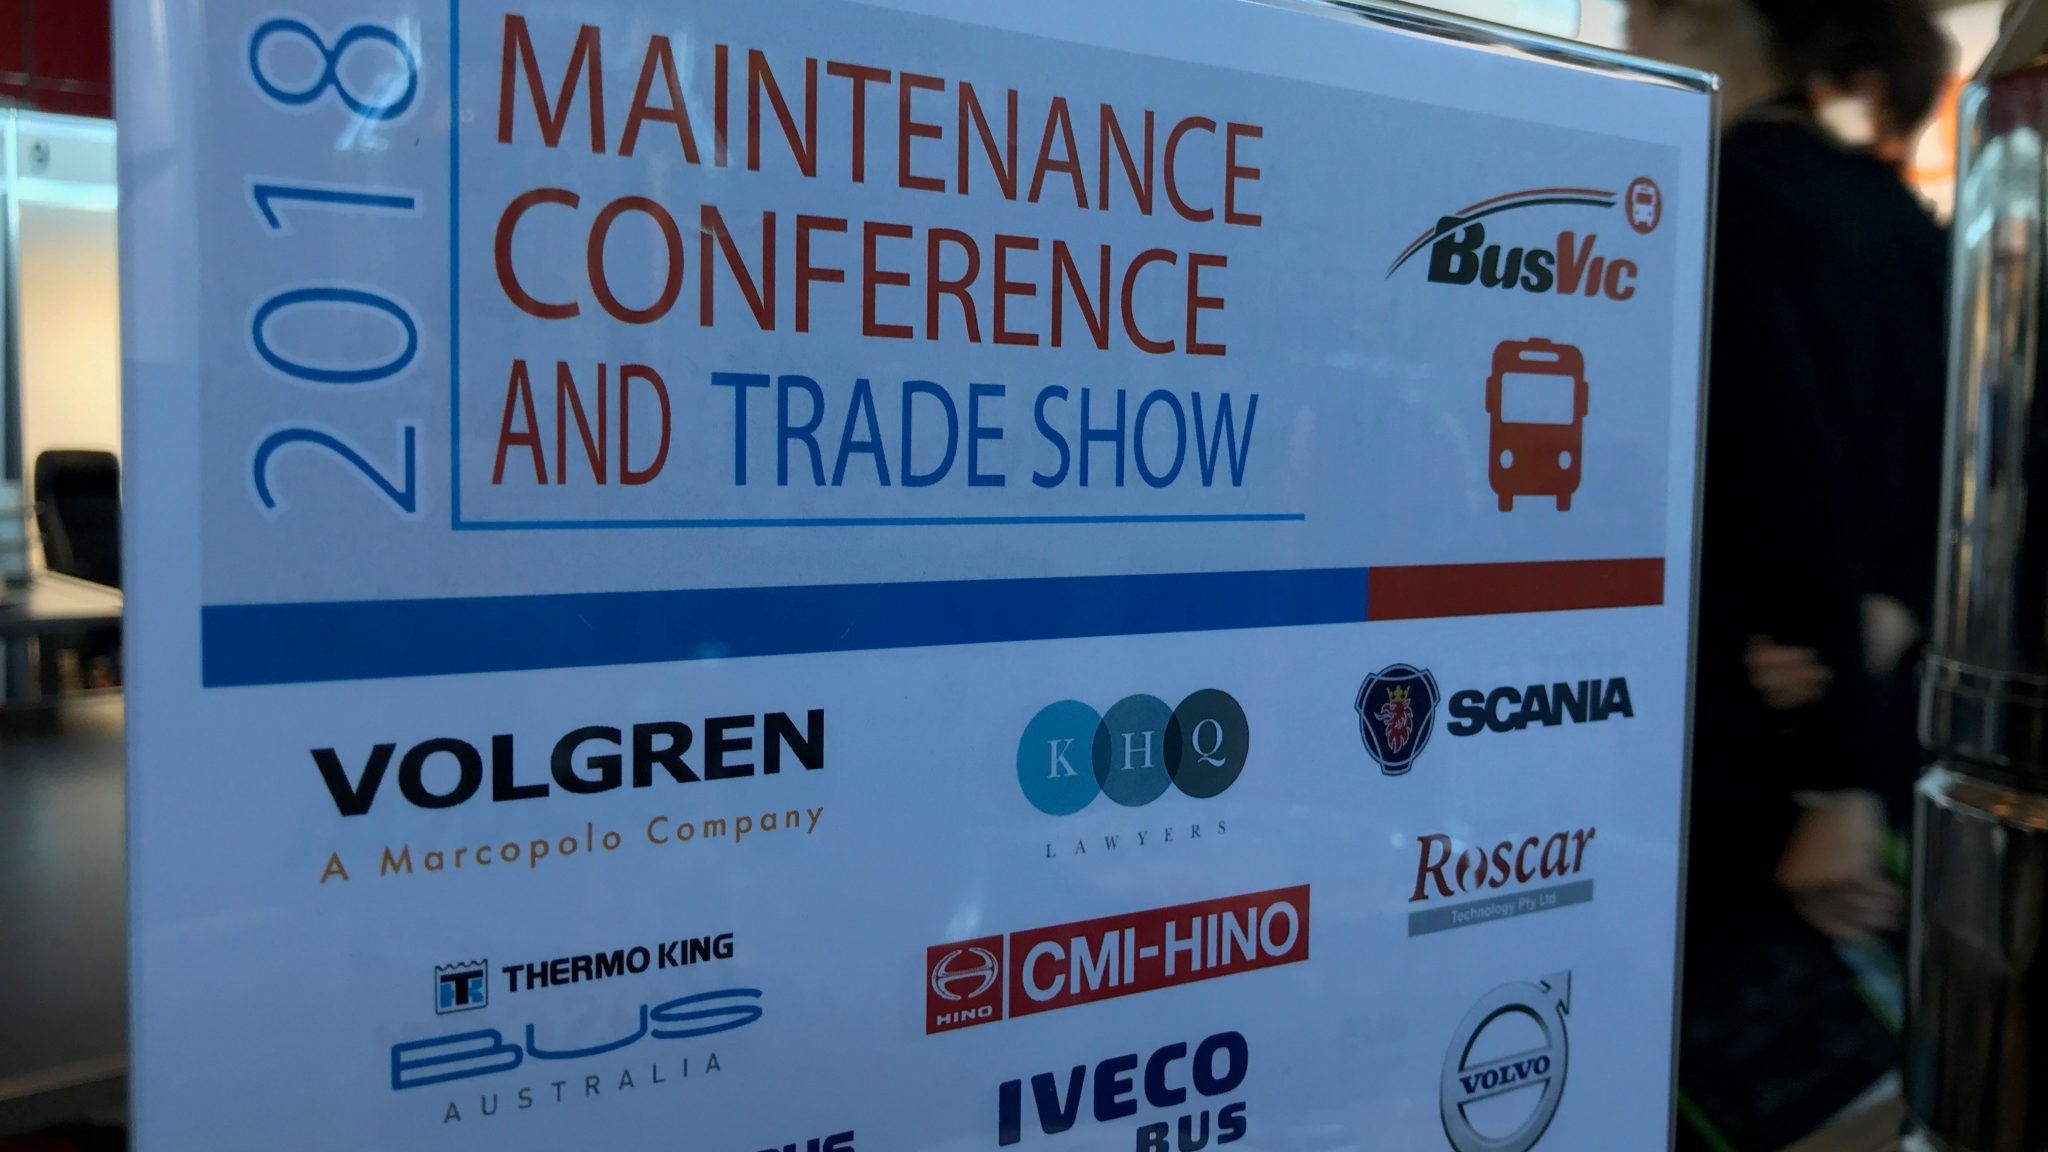 2018 BusVic Maintenance Conference and Trade Show Pullman Albert Park Melbourne